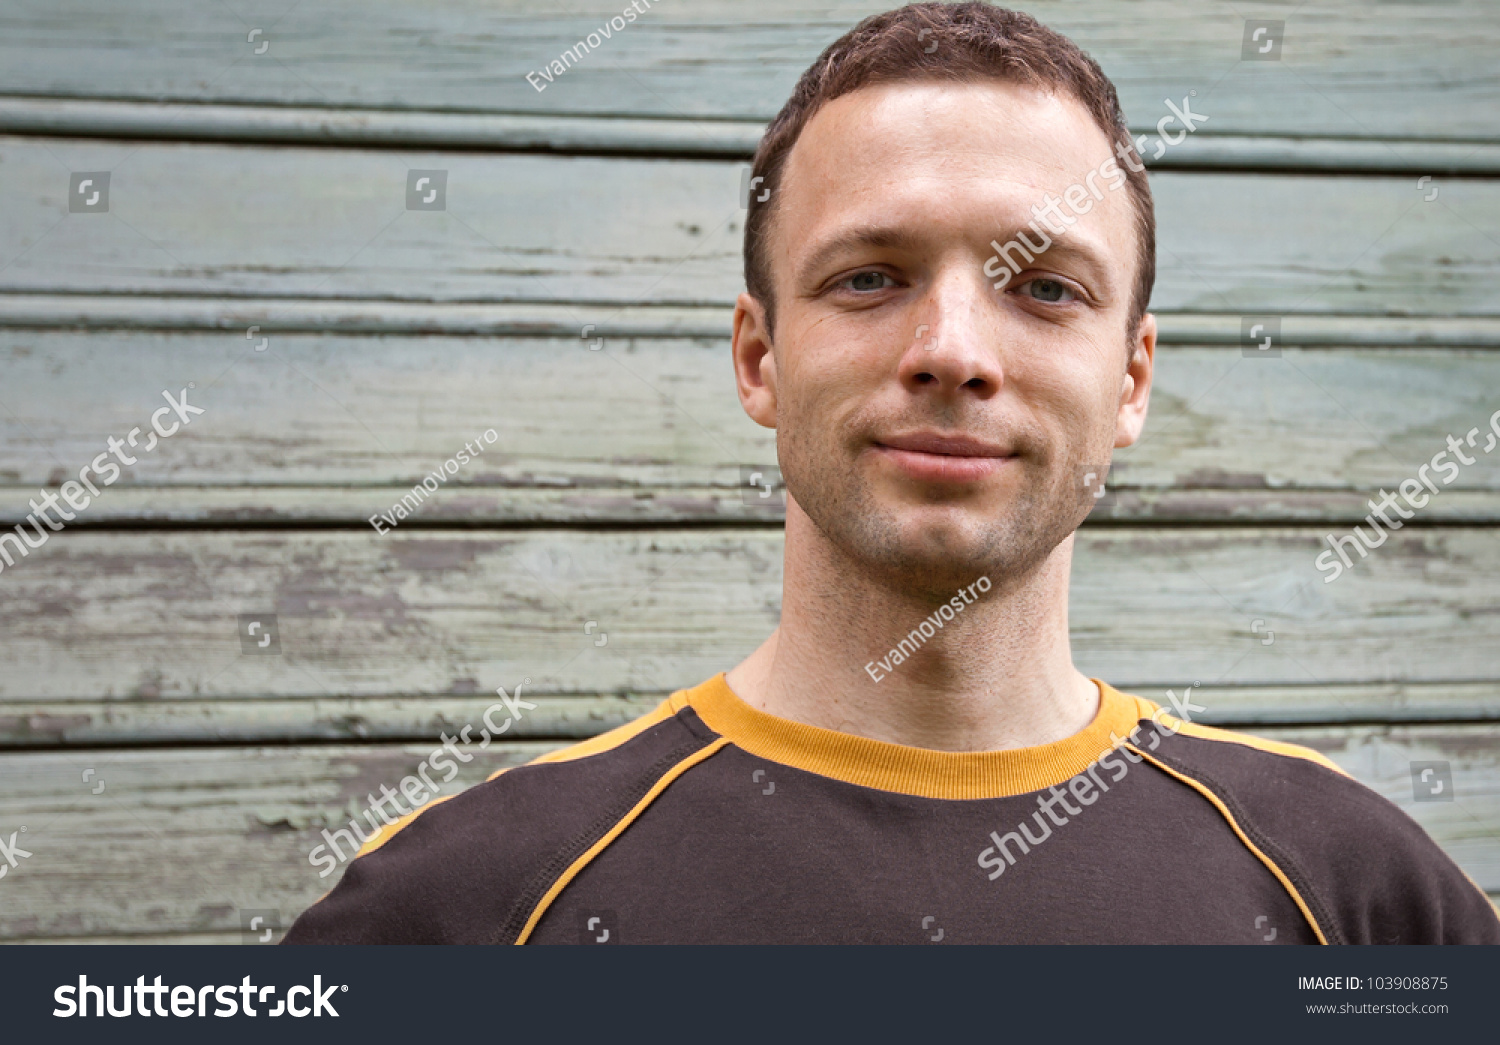 Closeup portrait of young man slightly smiling over old wooden wall #103908875